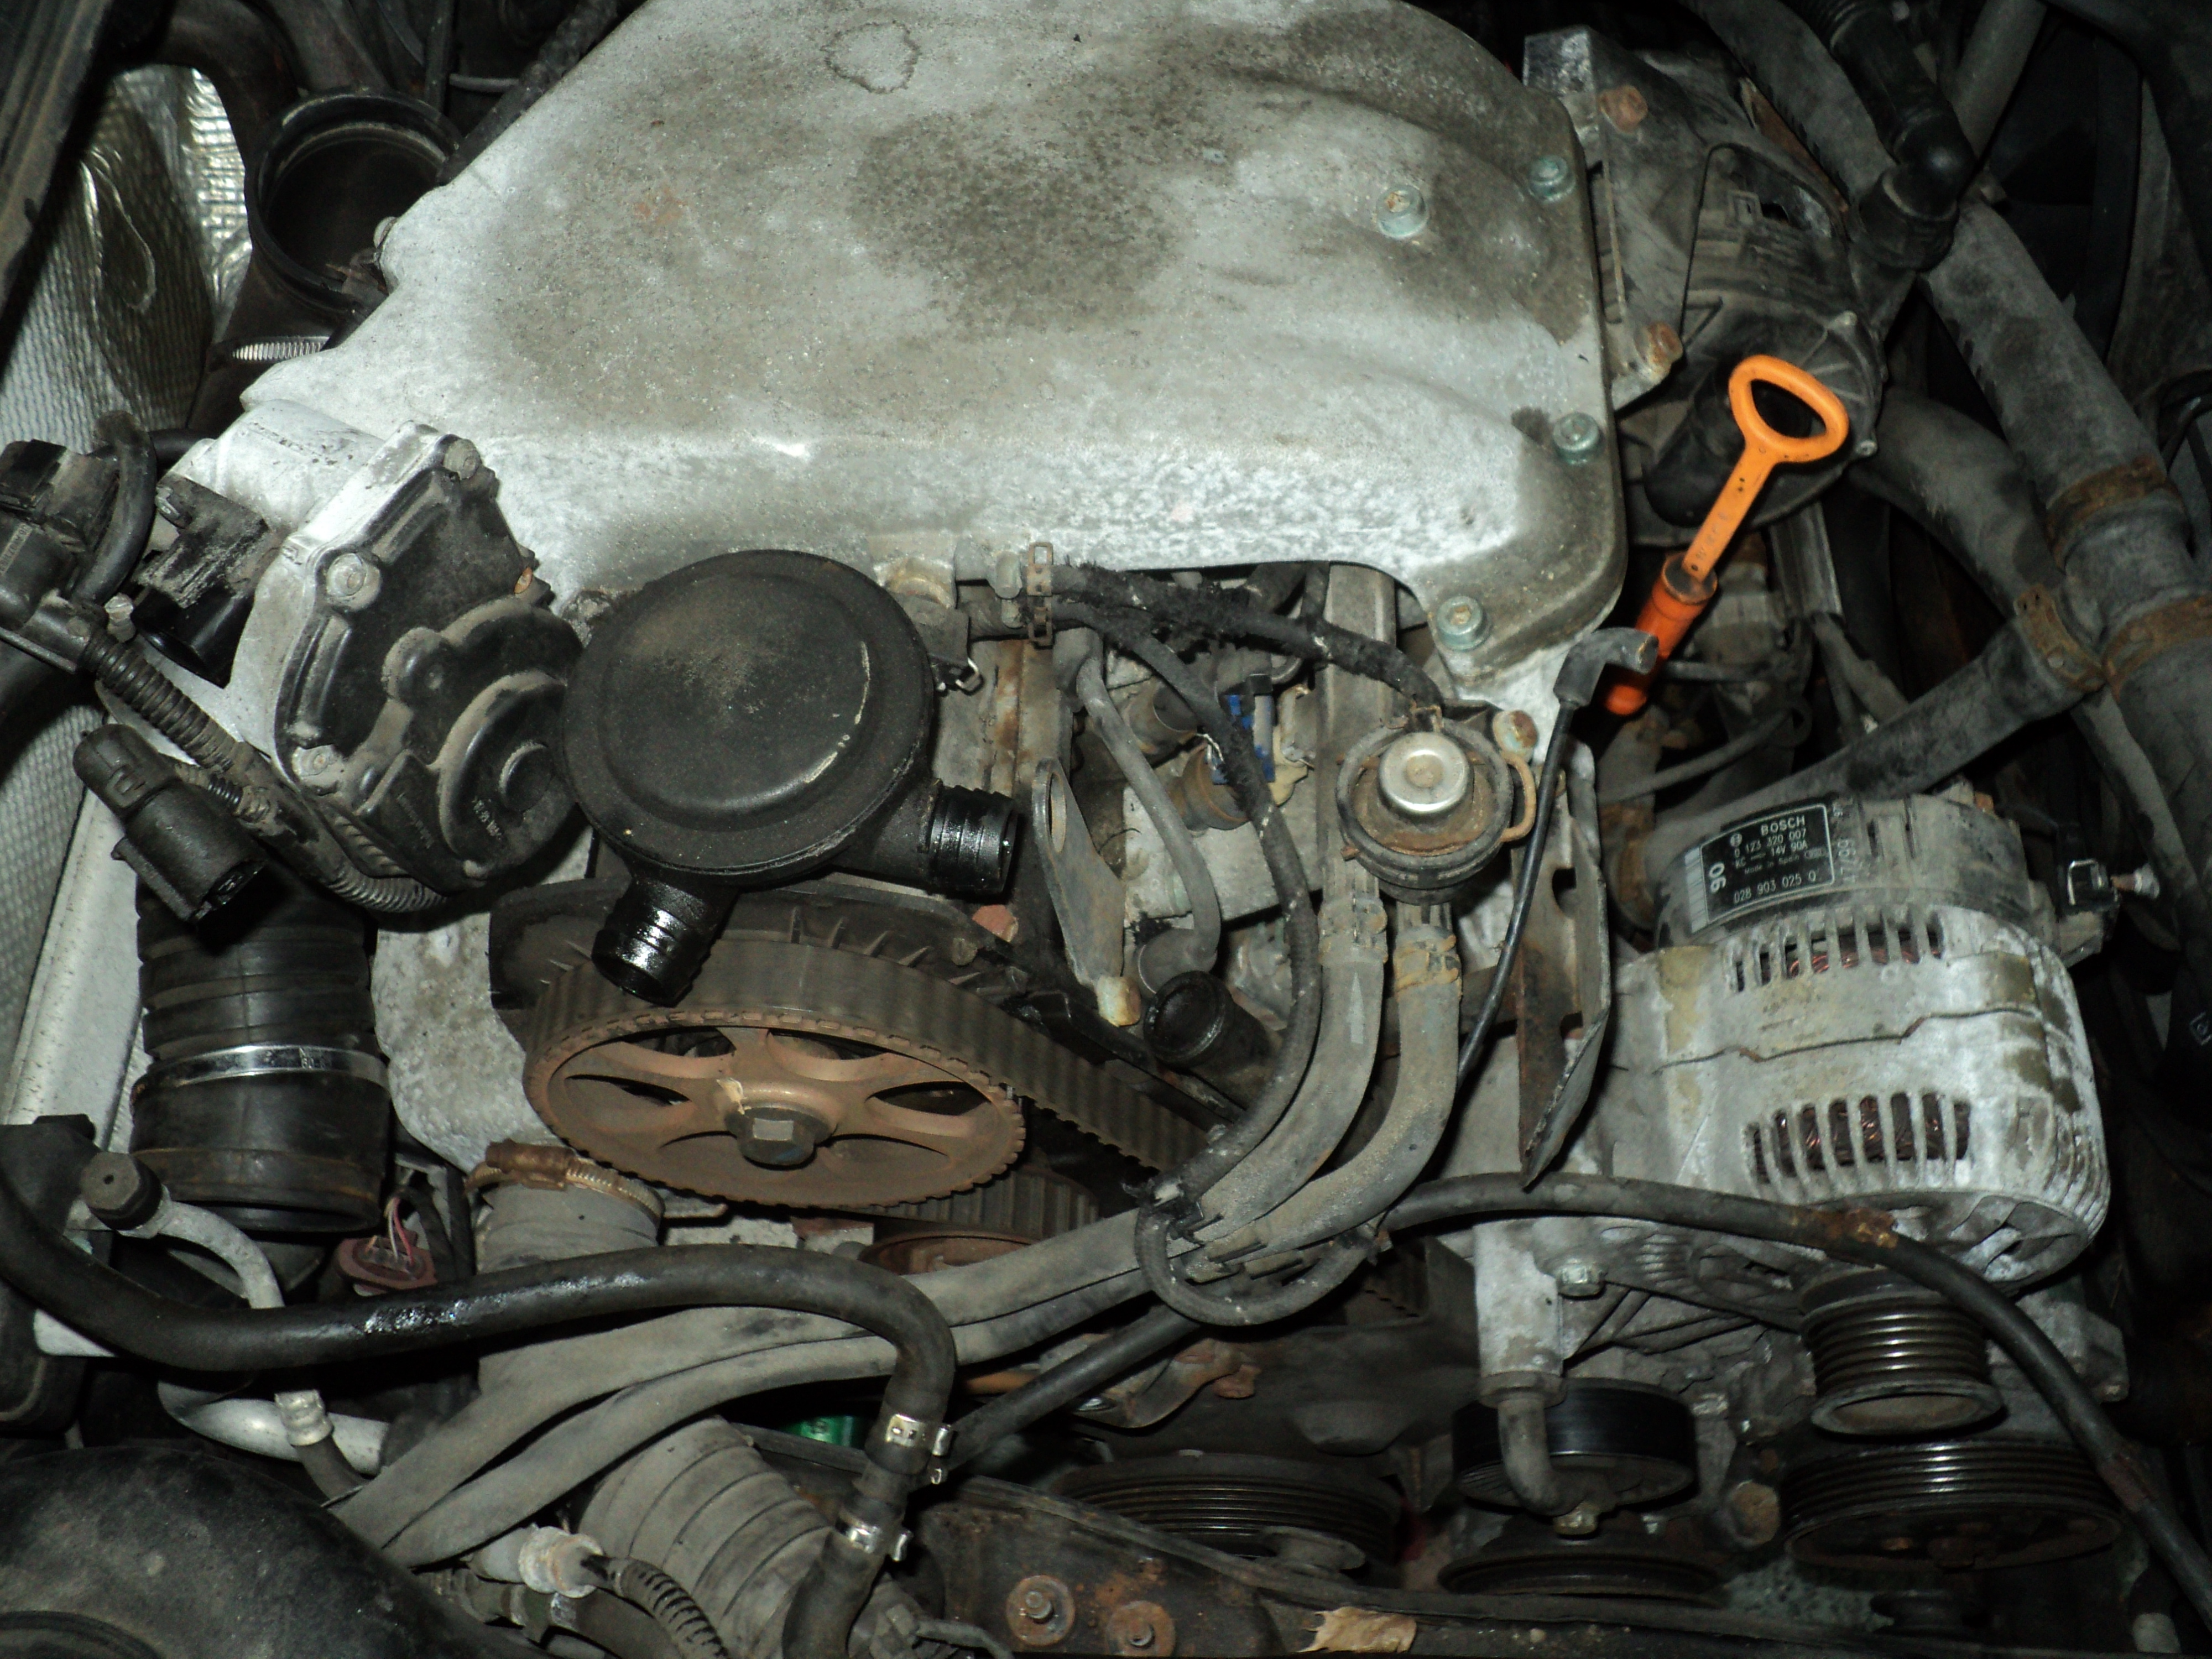 Start-of-a-timing-belt-replacement-on-a-2000-VW-cabrio